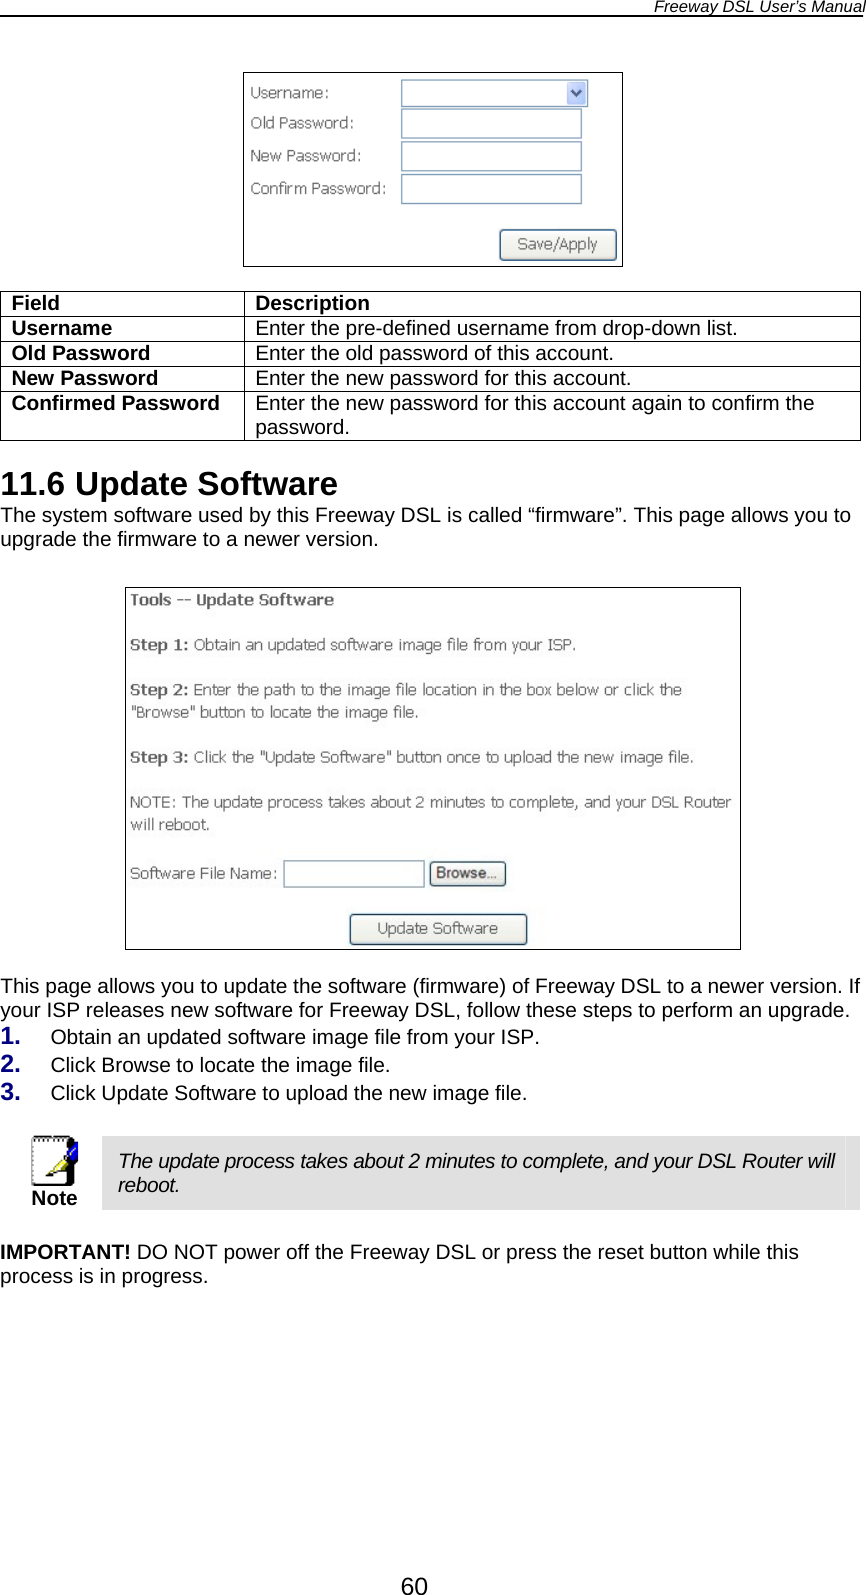 Freeway DSL User’s Manual  60   Field Description Username  Enter the pre-defined username from drop-down list. Old Password  Enter the old password of this account. New Password  Enter the new password for this account. Confirmed Password  Enter the new password for this account again to confirm the password.  11.6 Update Software The system software used by this Freeway DSL is called “firmware”. This page allows you to upgrade the firmware to a newer version.    This page allows you to update the software (firmware) of Freeway DSL to a newer version. If your ISP releases new software for Freeway DSL, follow these steps to perform an upgrade. 1.  Obtain an updated software image file from your ISP. 2.  Click Browse to locate the image file. 3.  Click Update Software to upload the new image file.   Note The update process takes about 2 minutes to complete, and your DSL Router will reboot.  IMPORTANT! DO NOT power off the Freeway DSL or press the reset button while this process is in progress.  